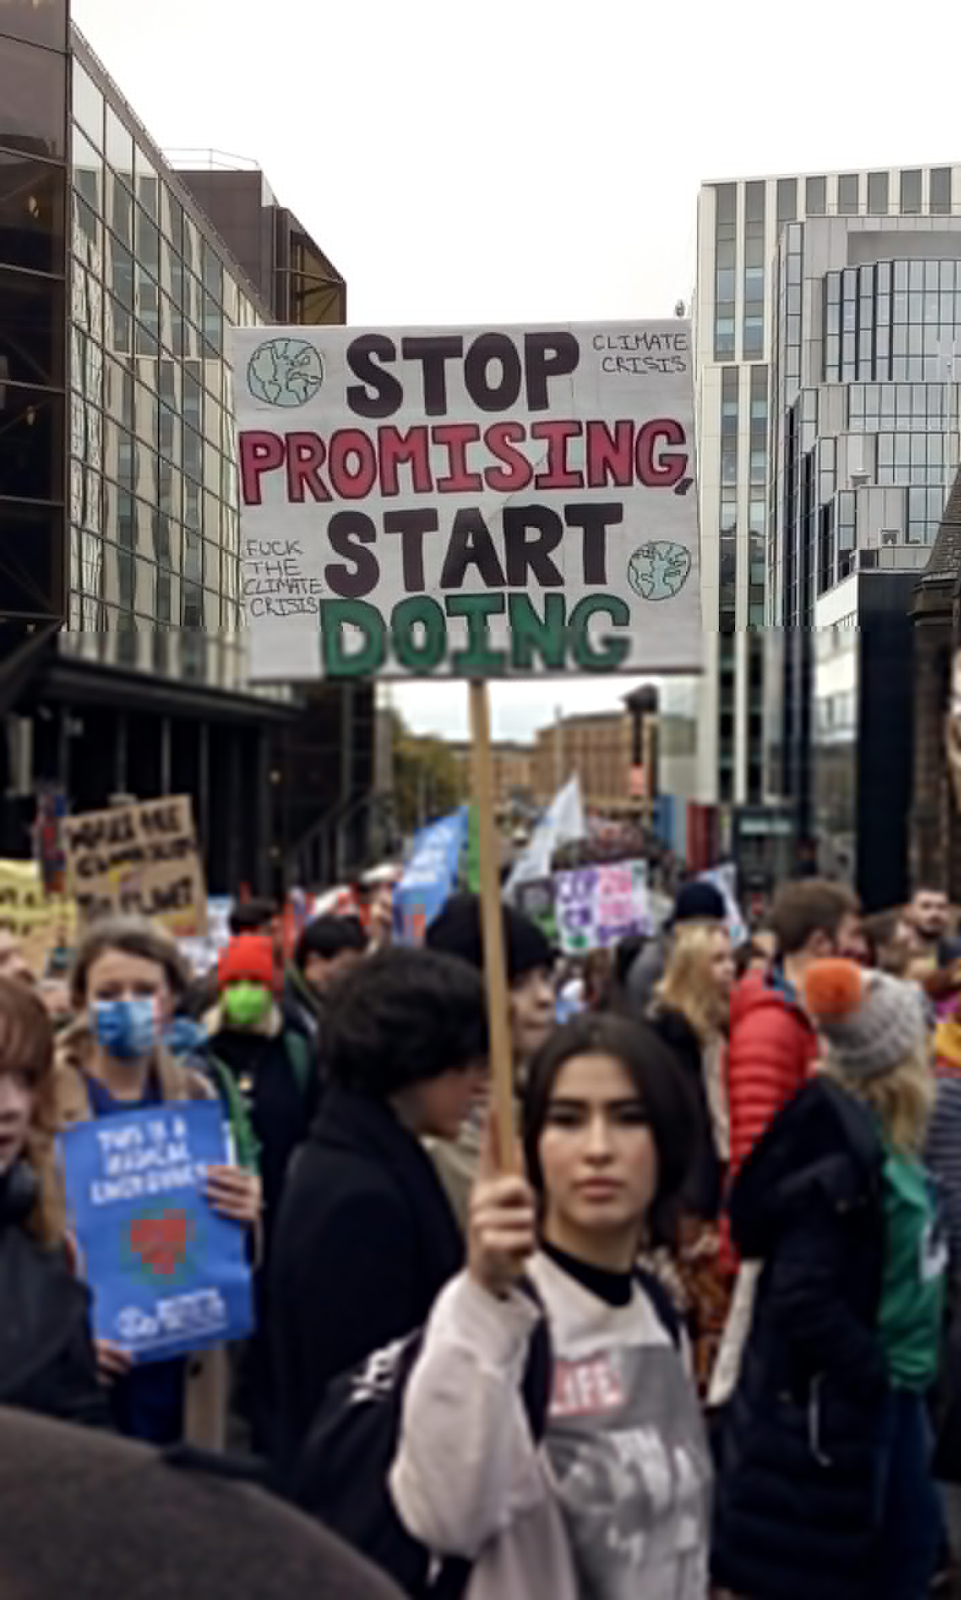 "Stop promising, start doing" at COP26 Glasgow Youth Climate Strike.